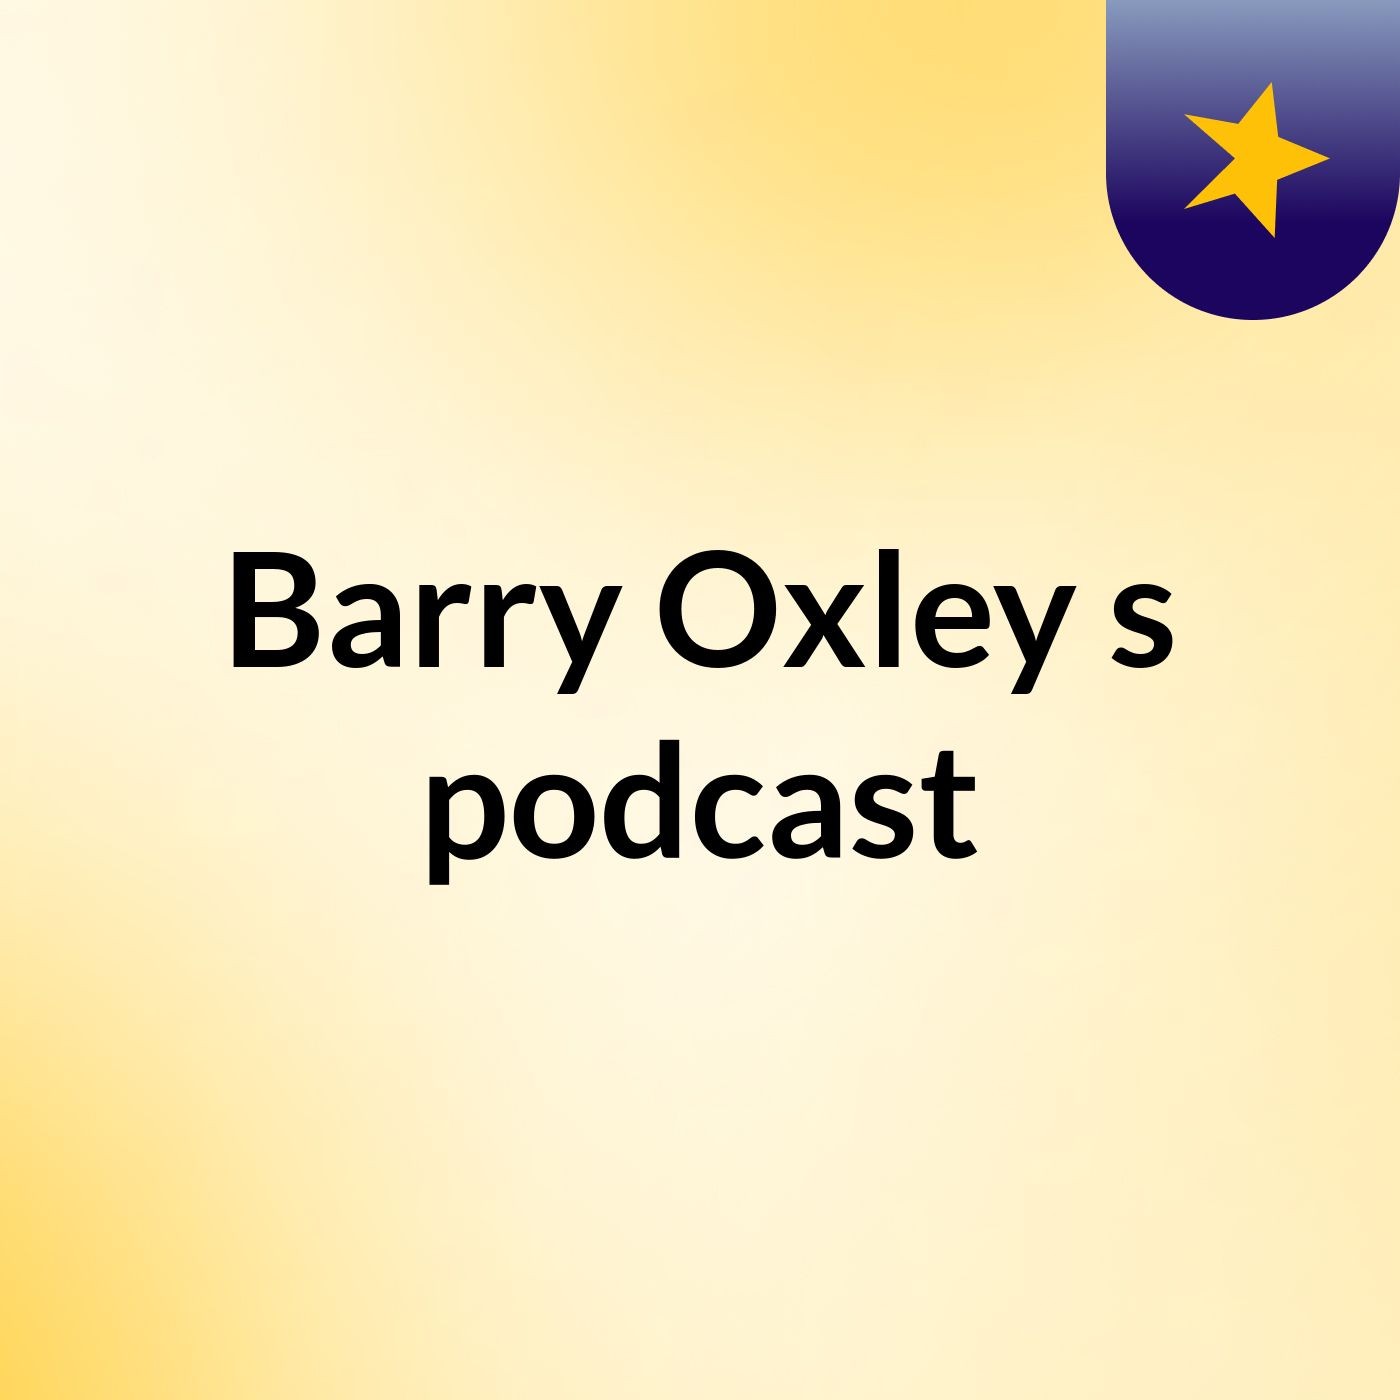 Episode 4 - Barry Oxley's podcast